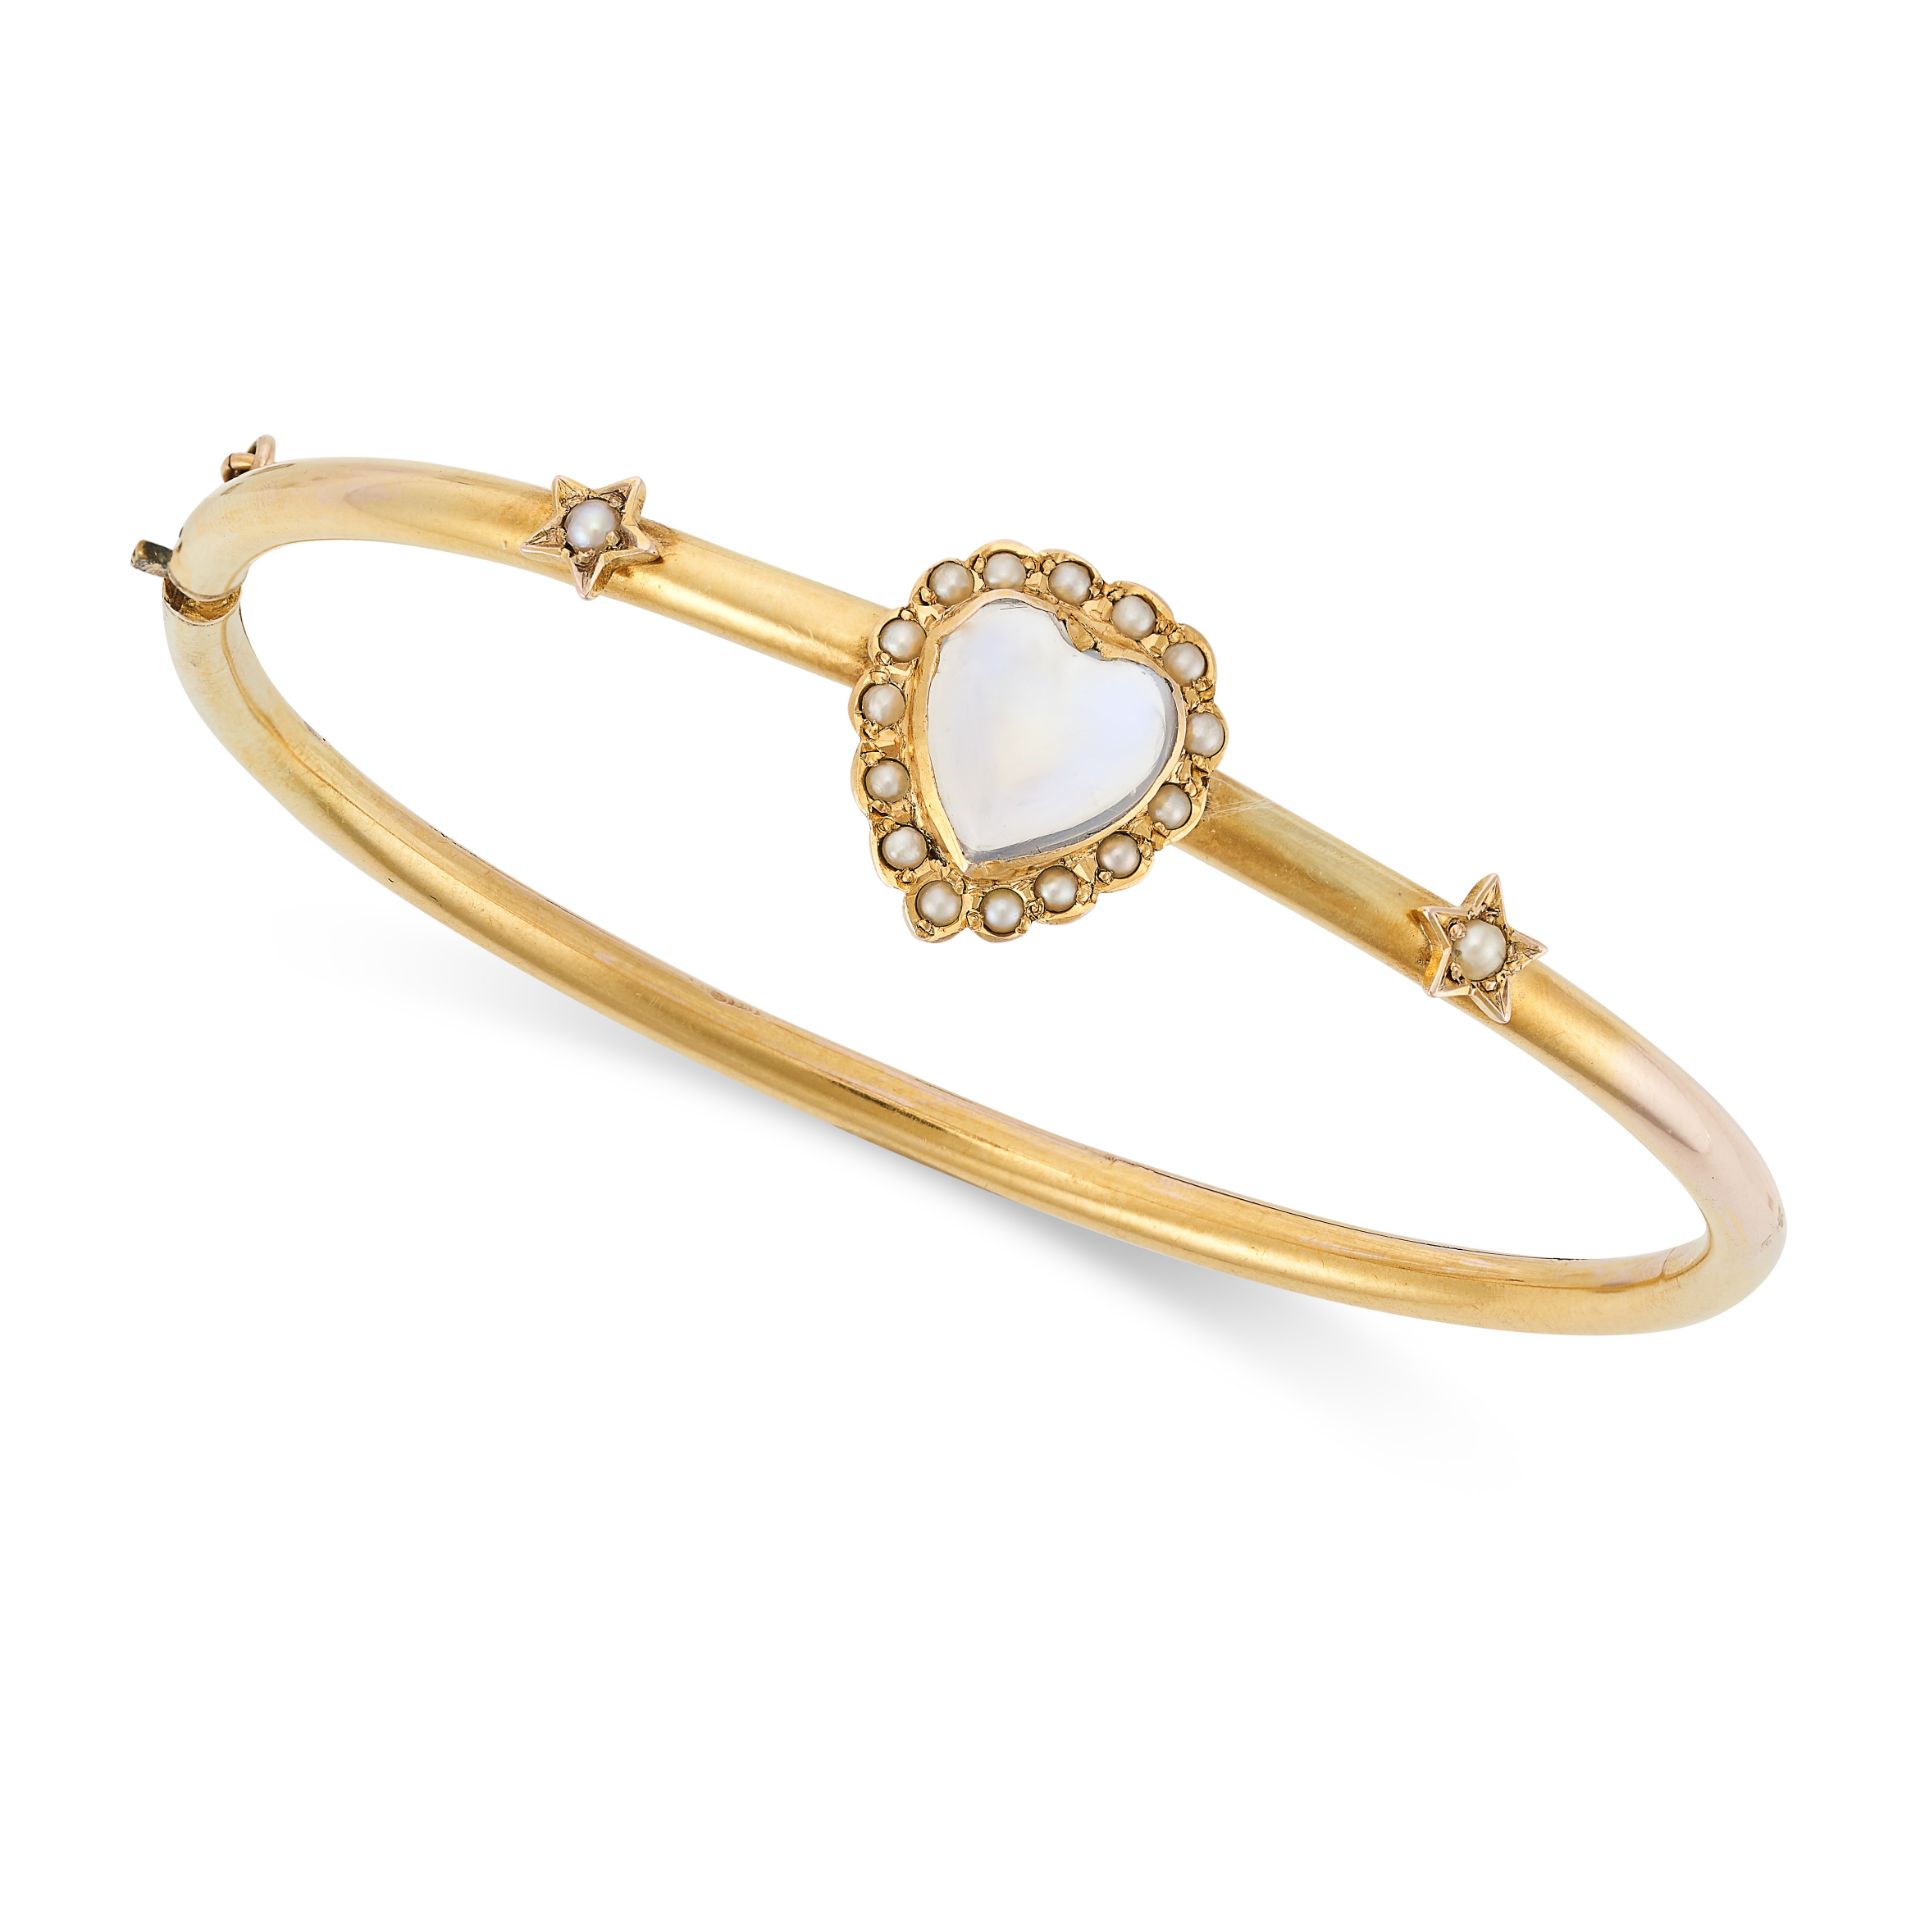 AN ANTIQUE MOONSTONE AND PEARL BANGLE in yellow gold, the hinged bangle set with a heart shaped